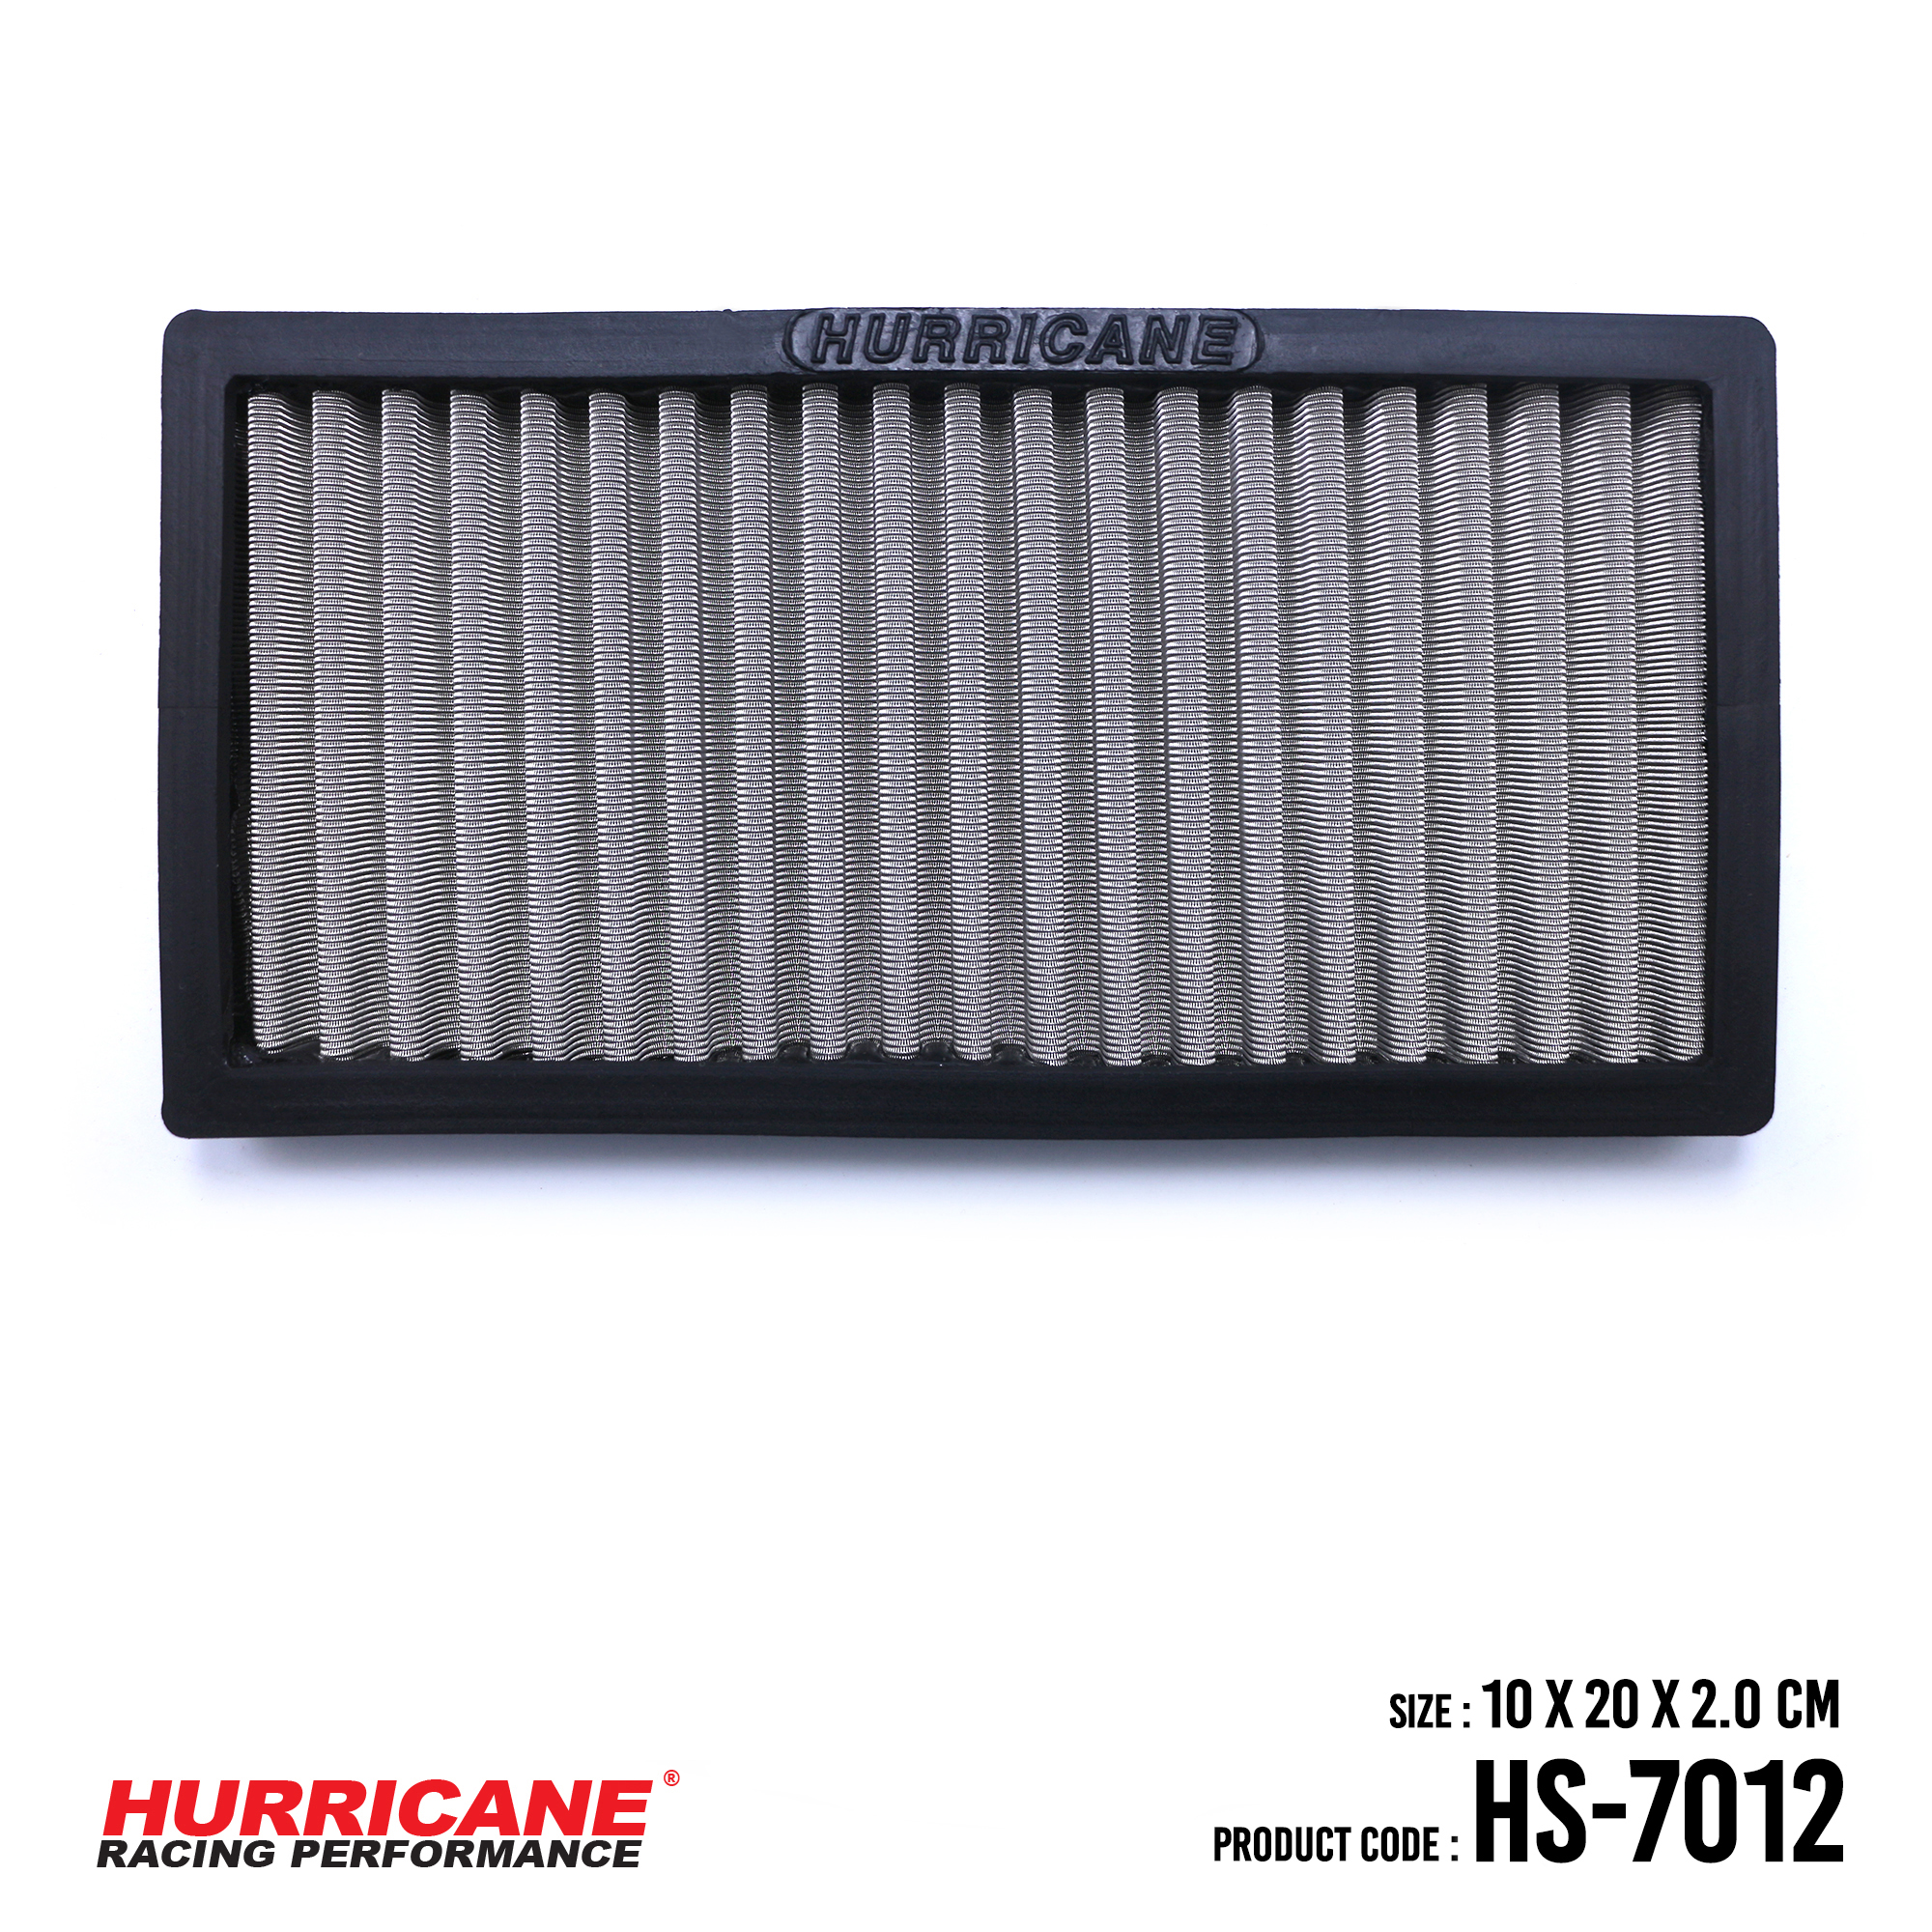 HURRICANE STAINLESS STEEL CABIN AIR FILTER FOR HS-7012 Ssangyong